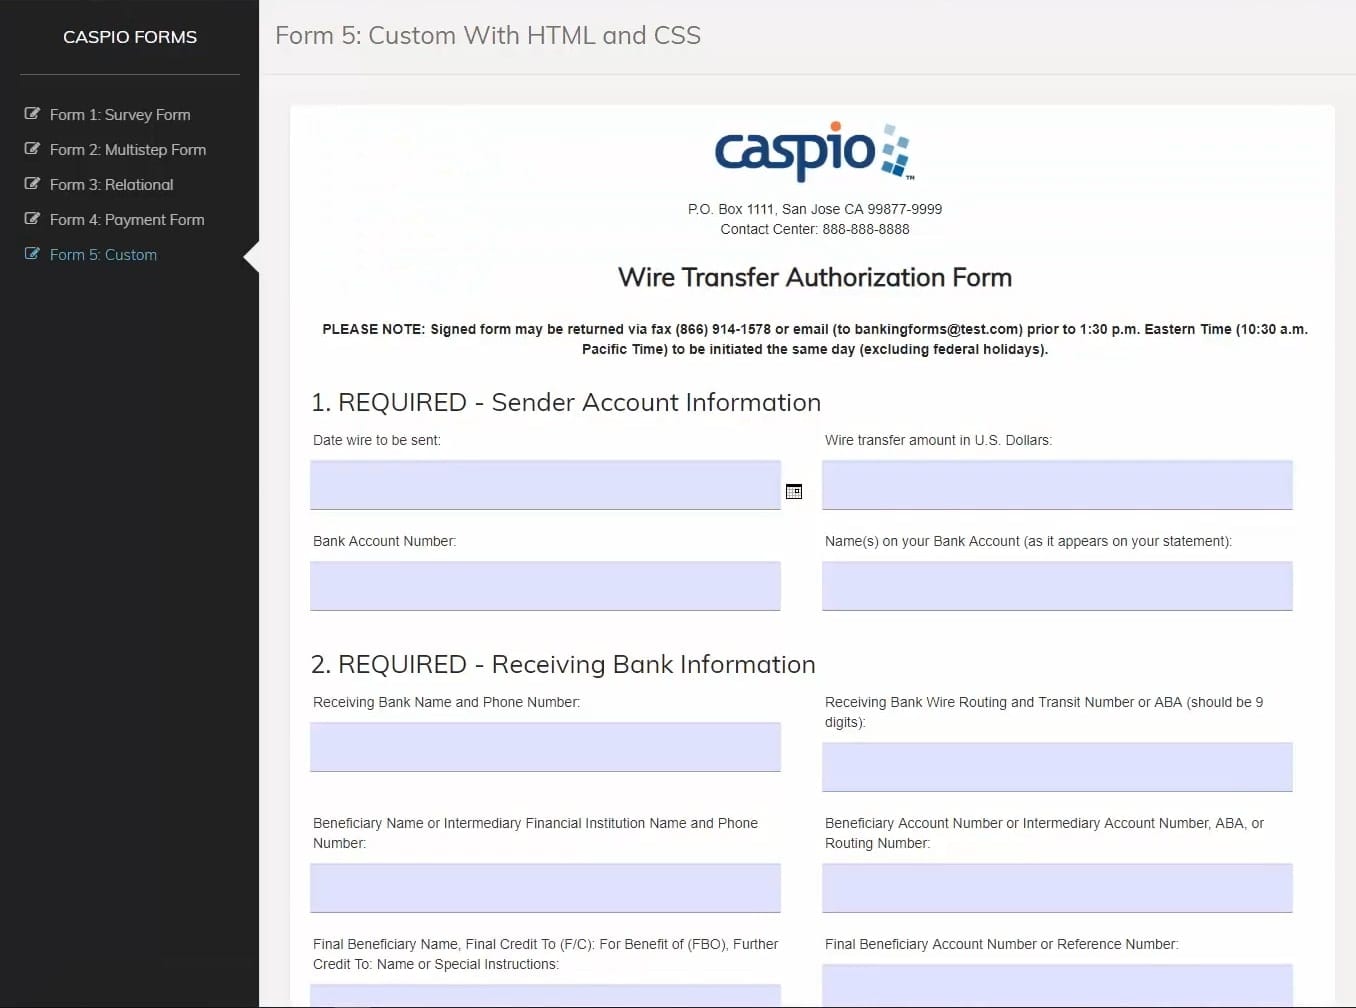 Screenshot of a sample custom form made on Caspio. It shows a “Wie Transfer Authorization Form” with several text fields that users can fill out.